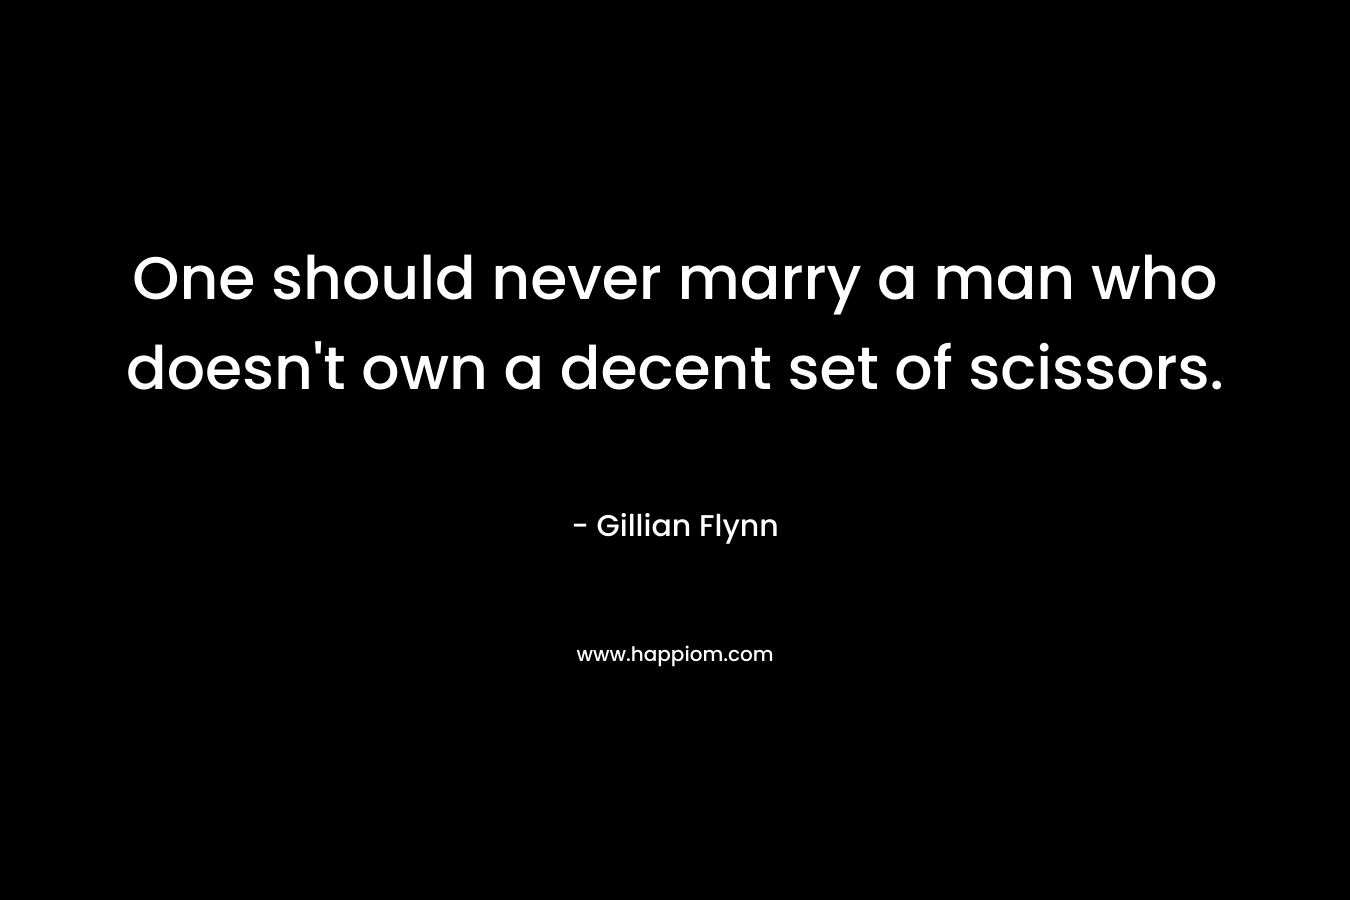 One should never marry a man who doesn’t own a decent set of scissors. – Gillian Flynn